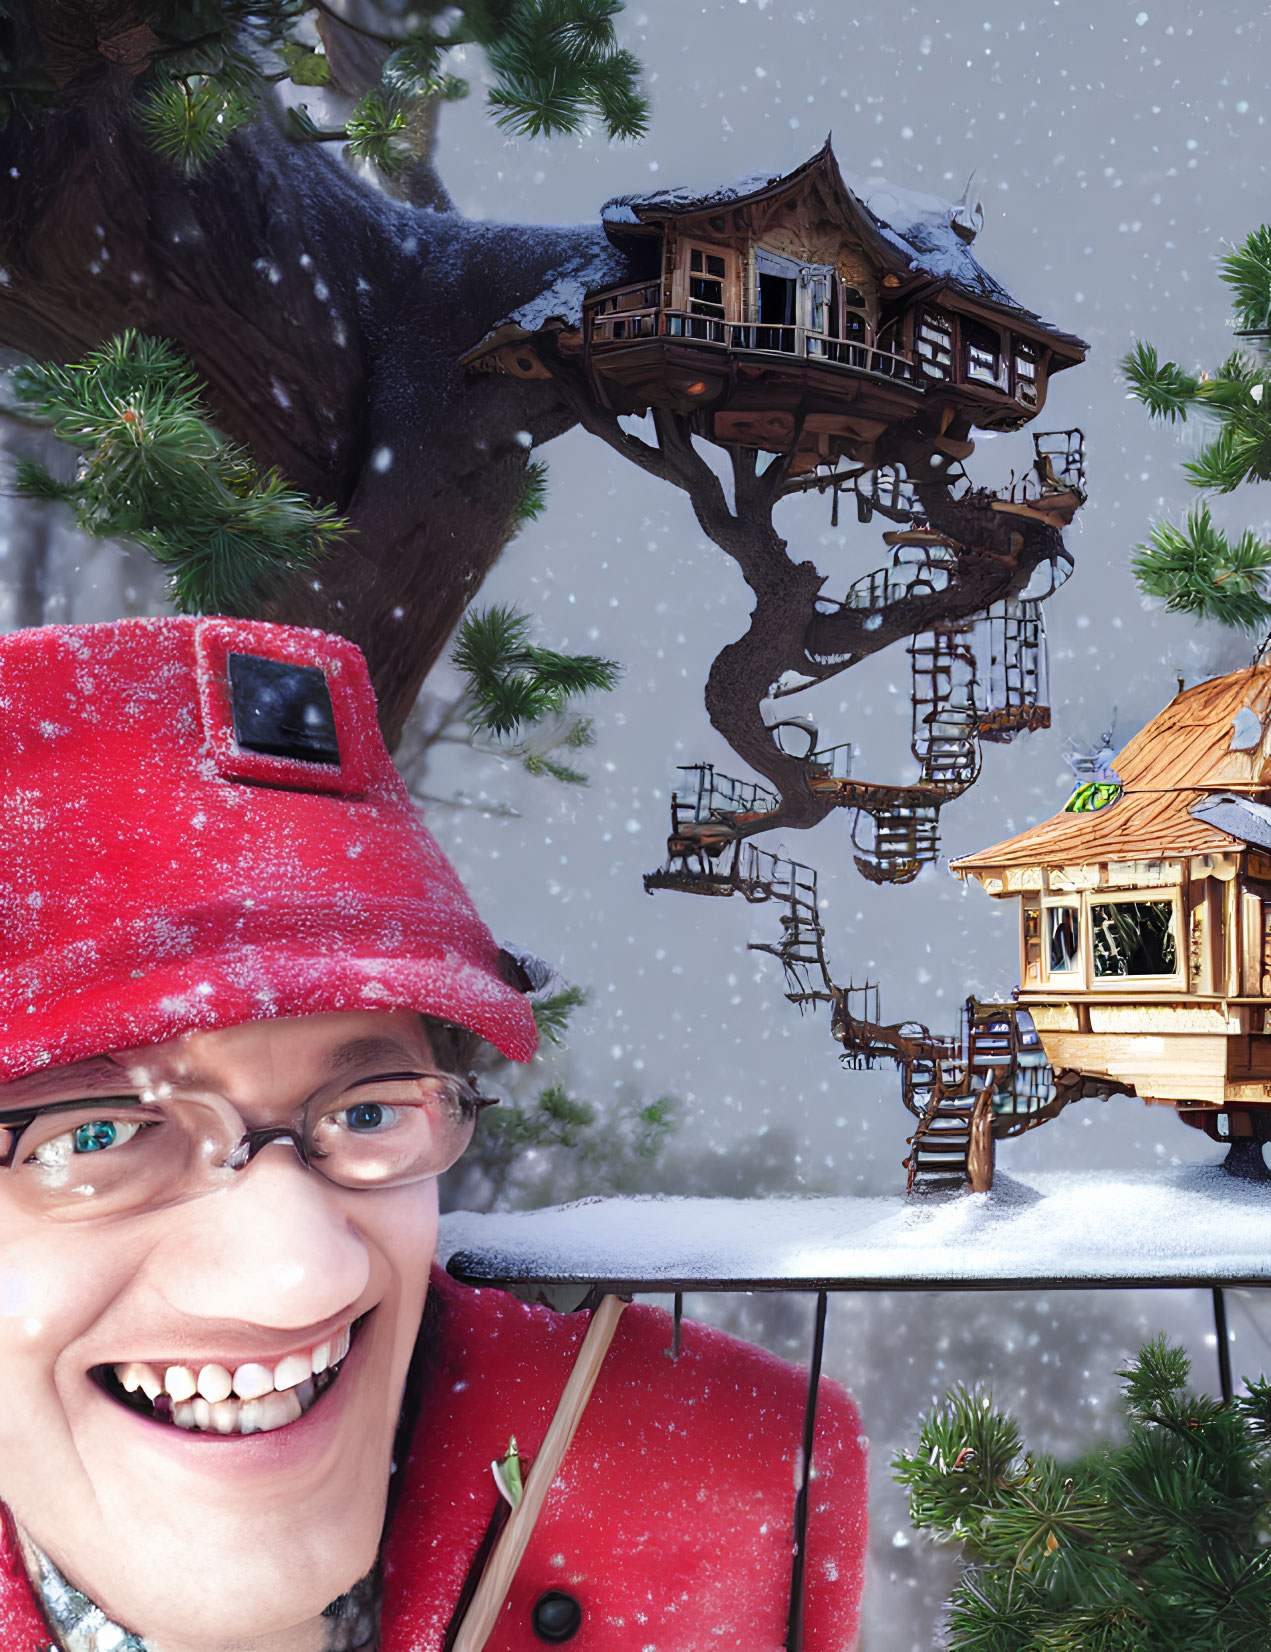 Person in Red Coat and Cap with Snowy Treehouse Village